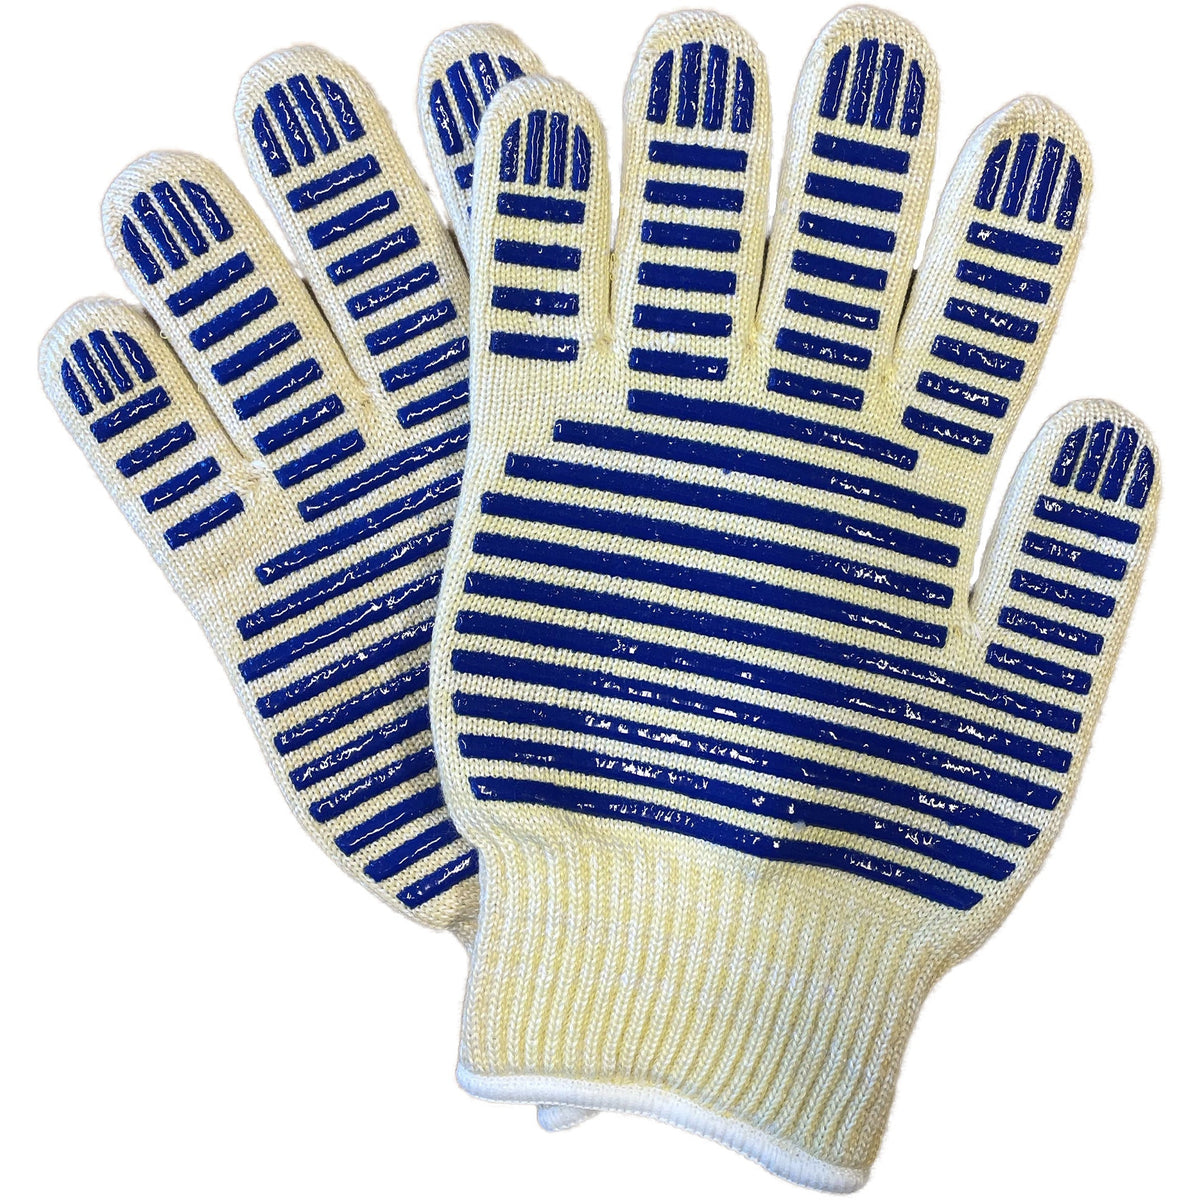 Heat-Resistant Silicone Gloves for Kamado Barbecues